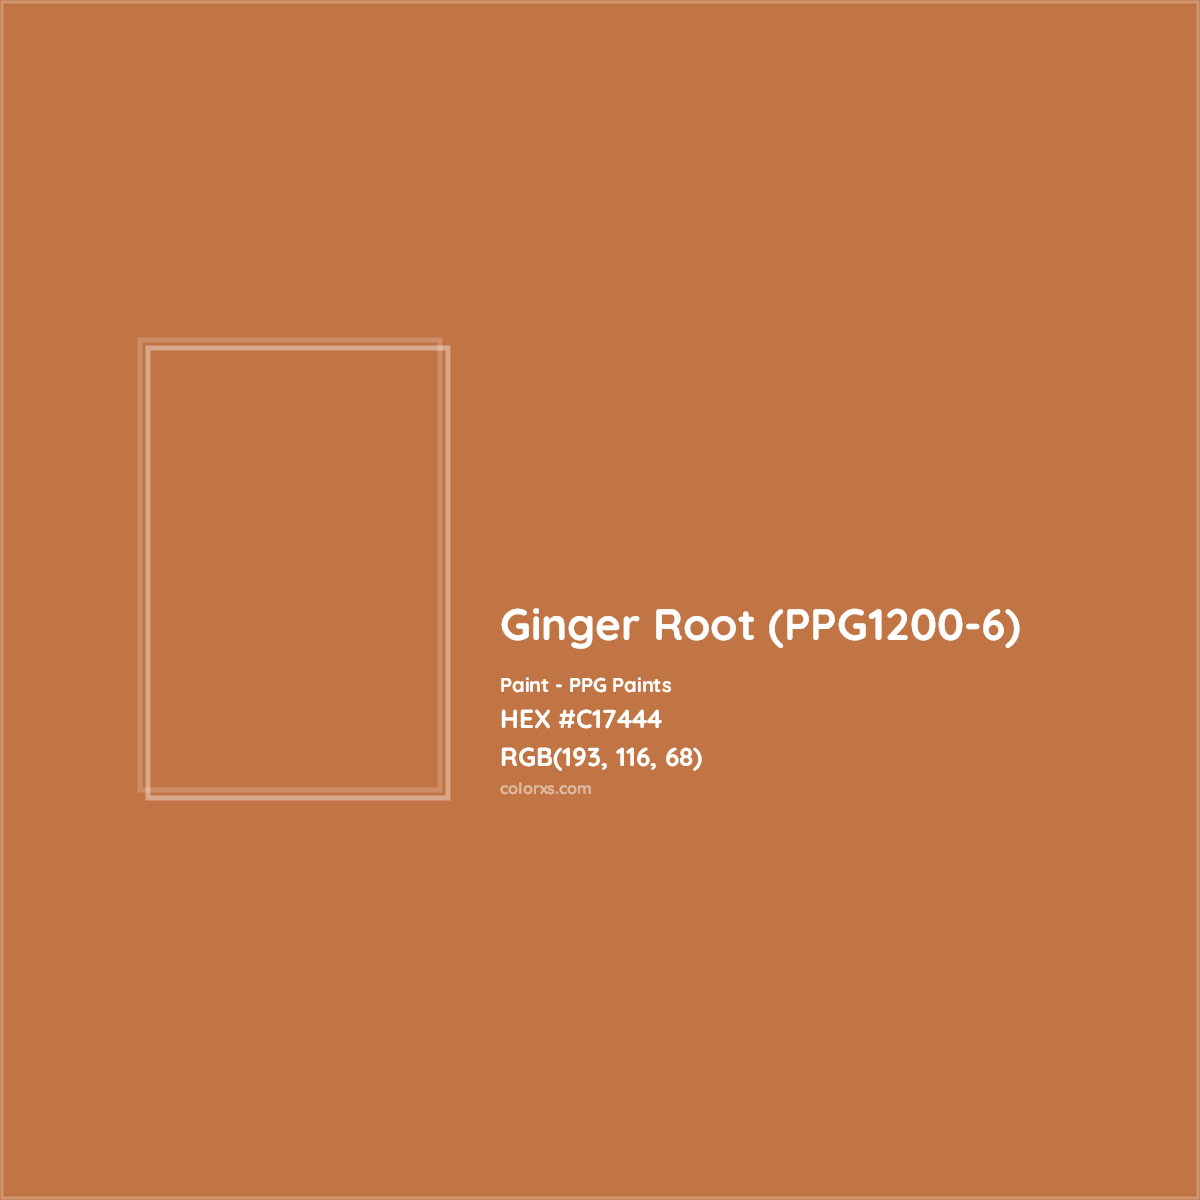 HEX #C17444 Ginger Root (PPG1200-6) Paint PPG Paints - Color Code